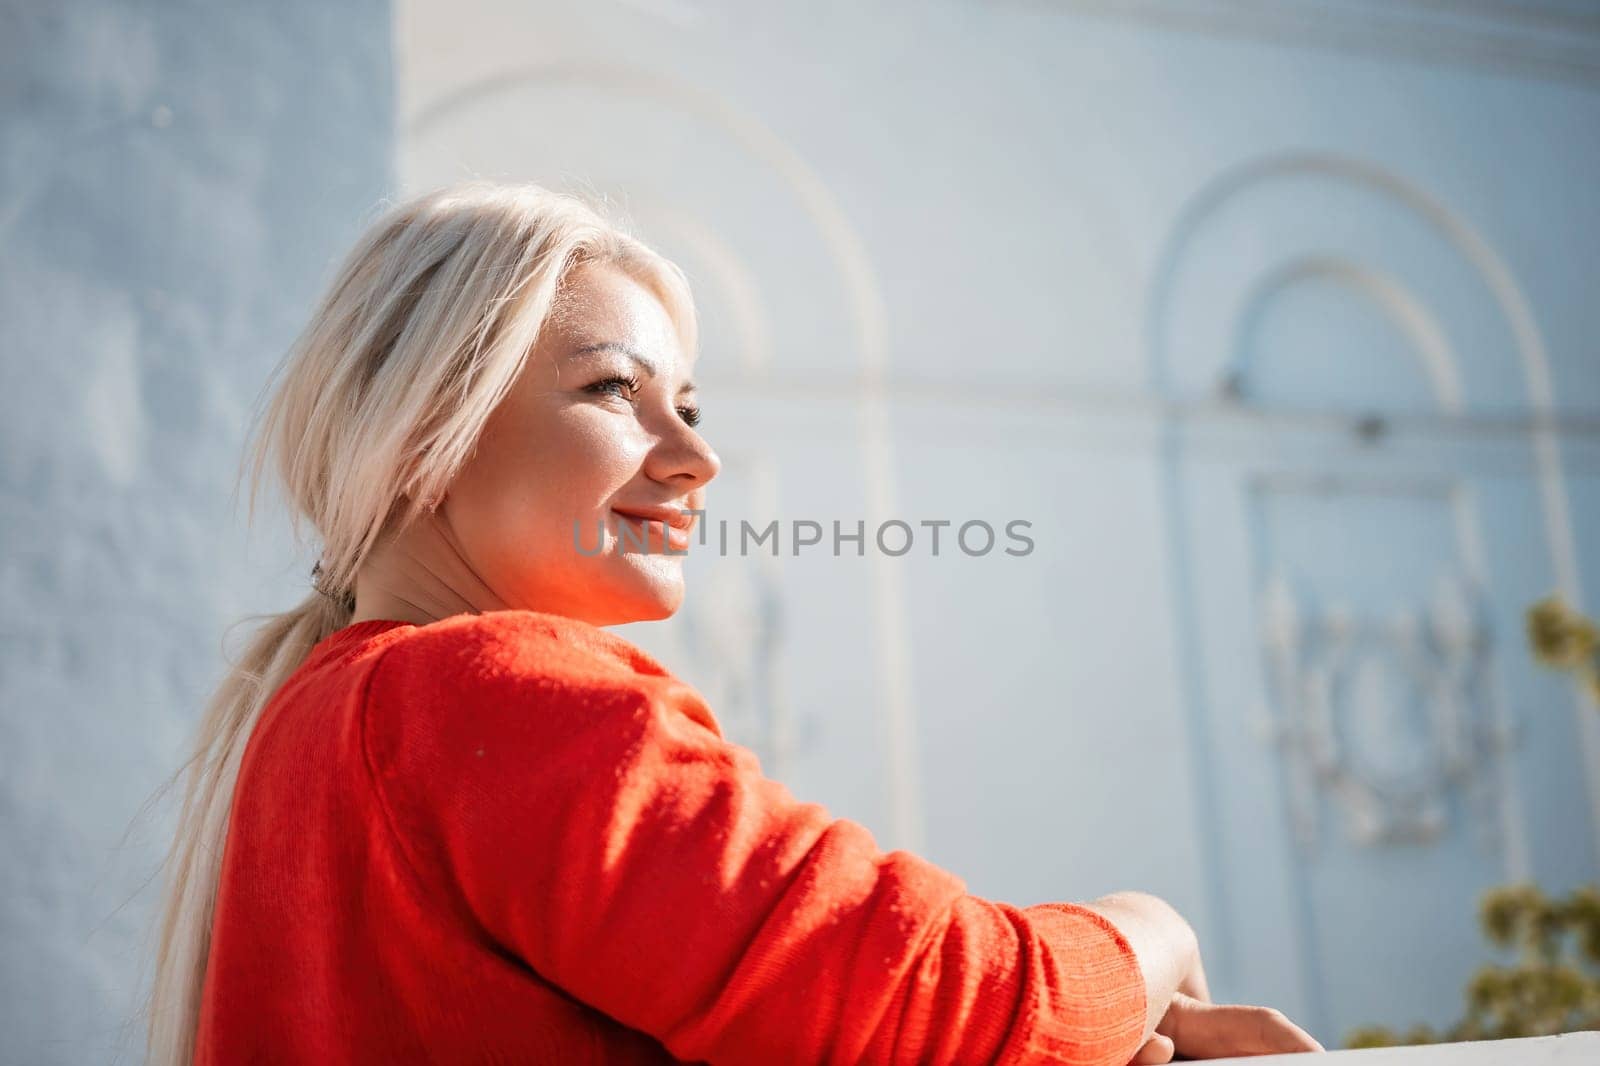 A woman in a red sweater is sitting on a ledge. She is smiling and looking out at the street